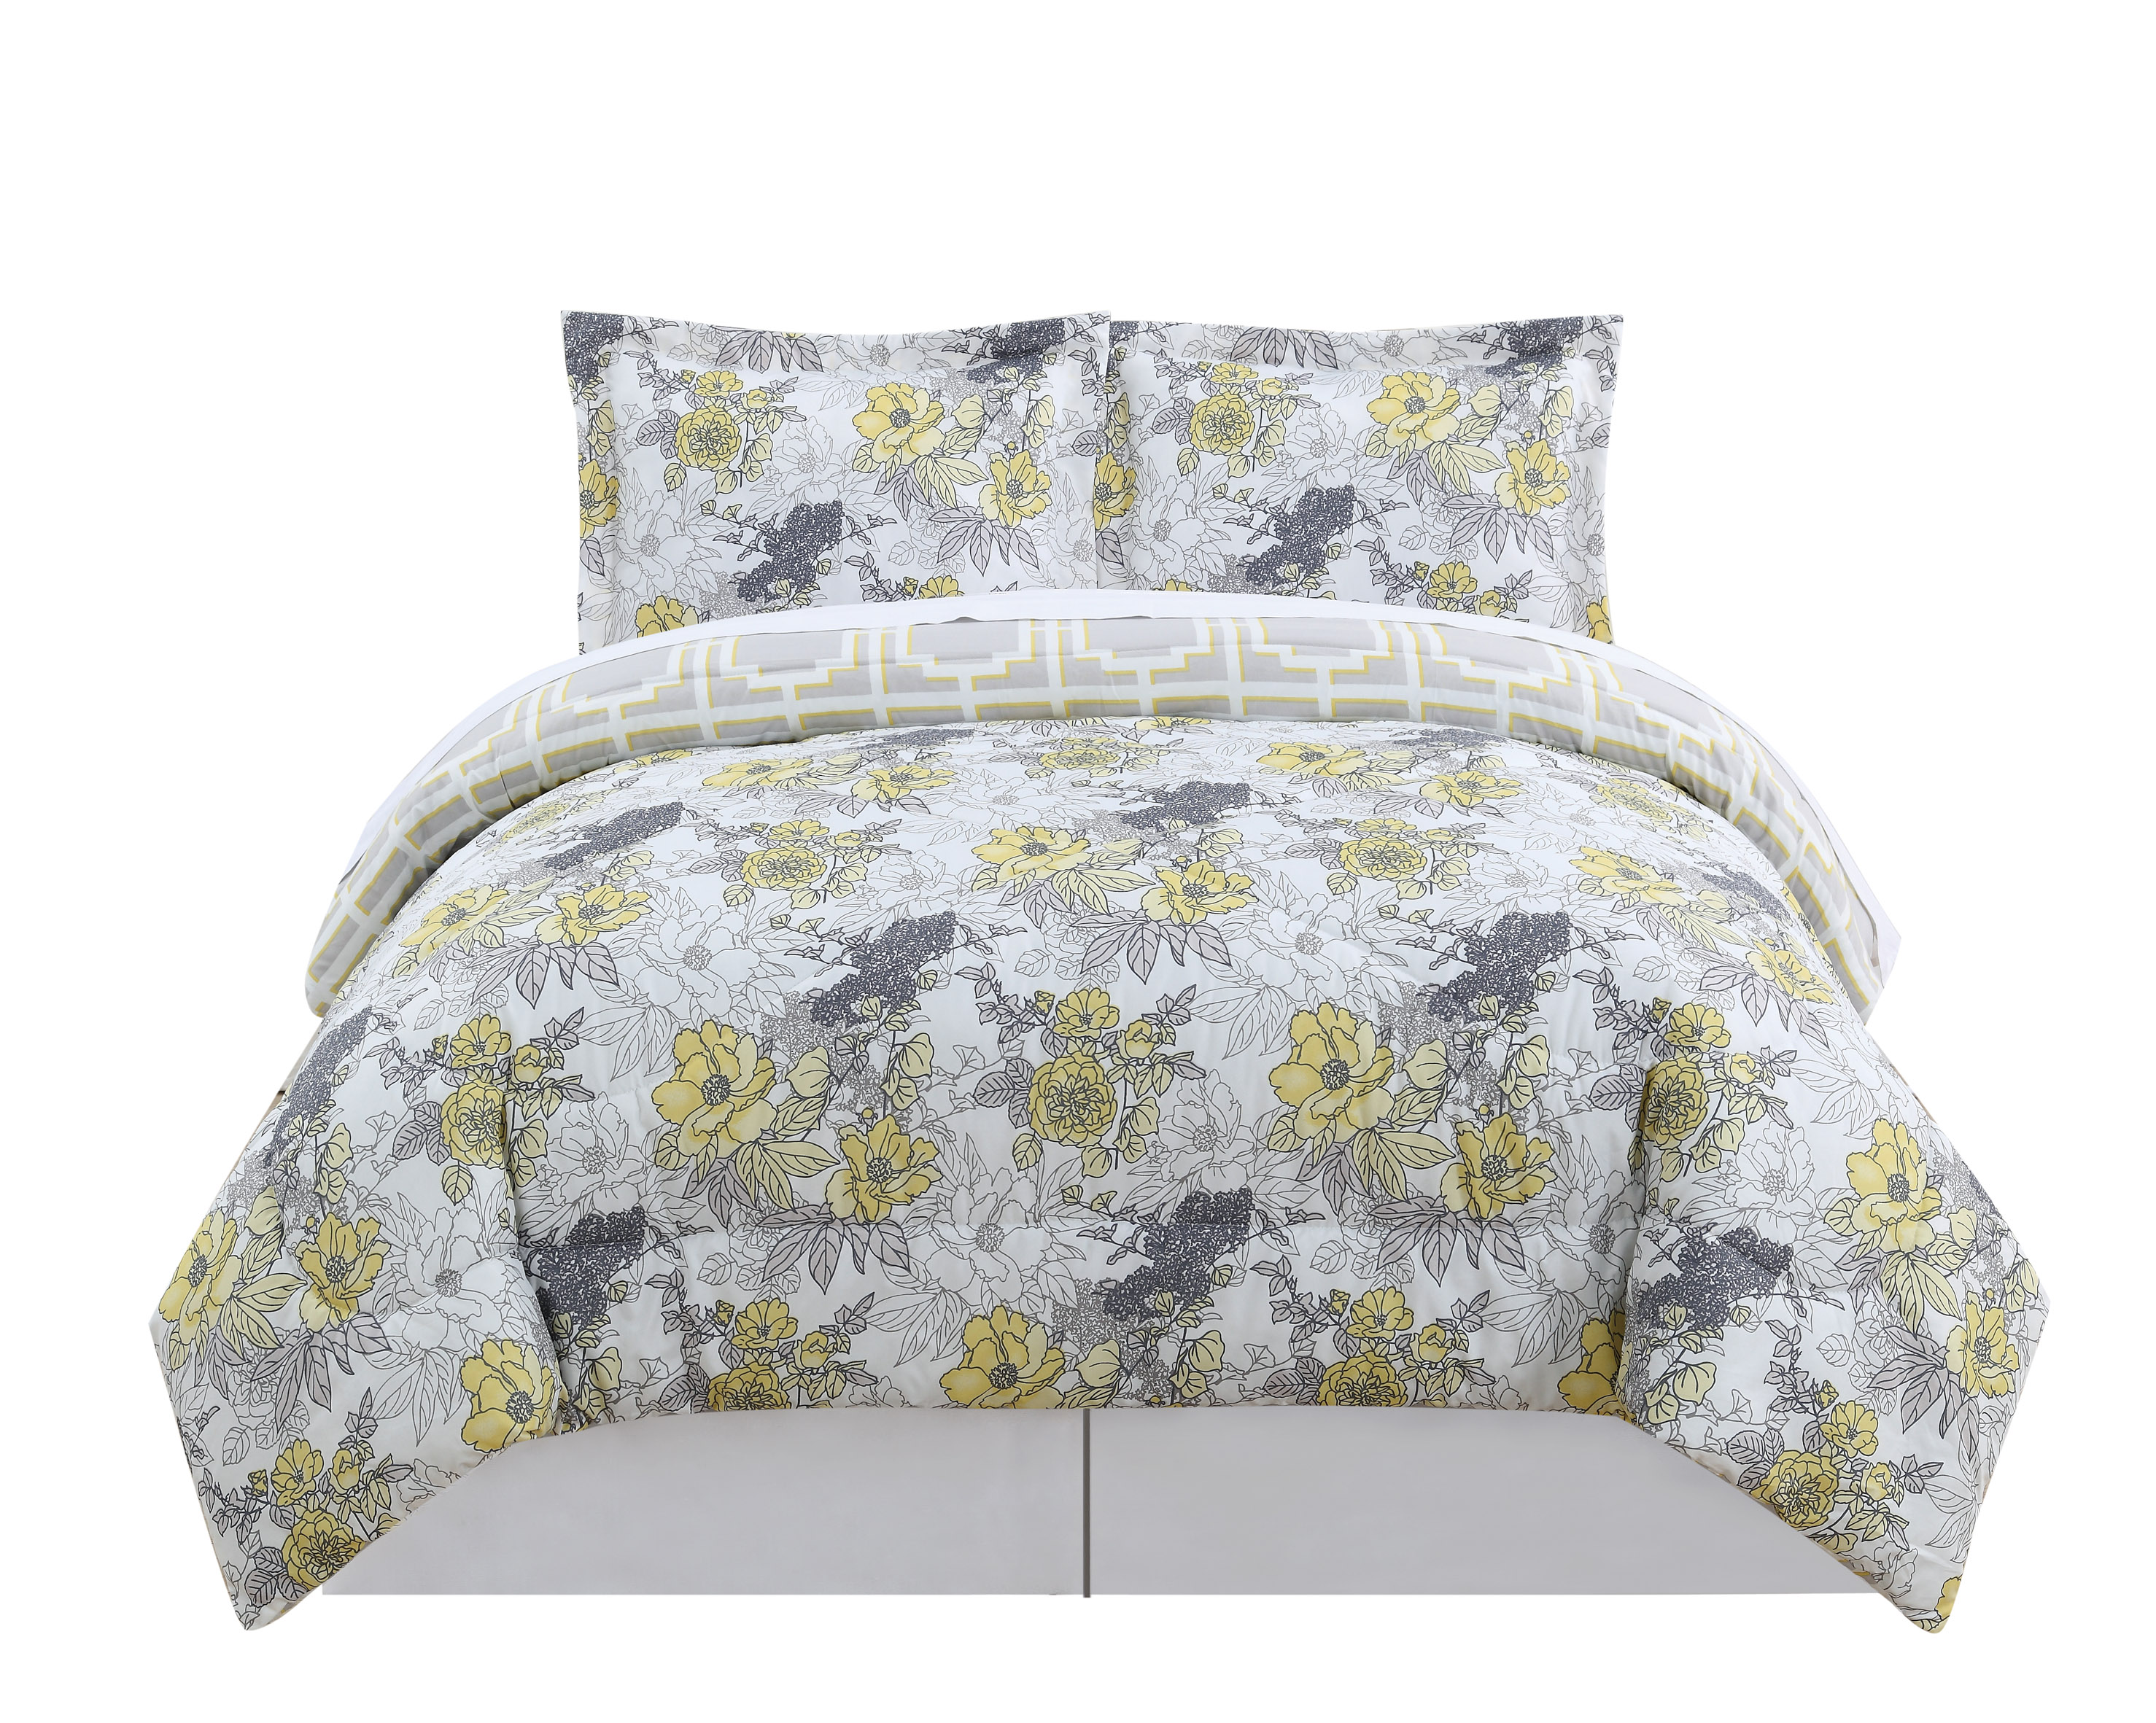 Peony Floral Comforter Set with Sham(s)